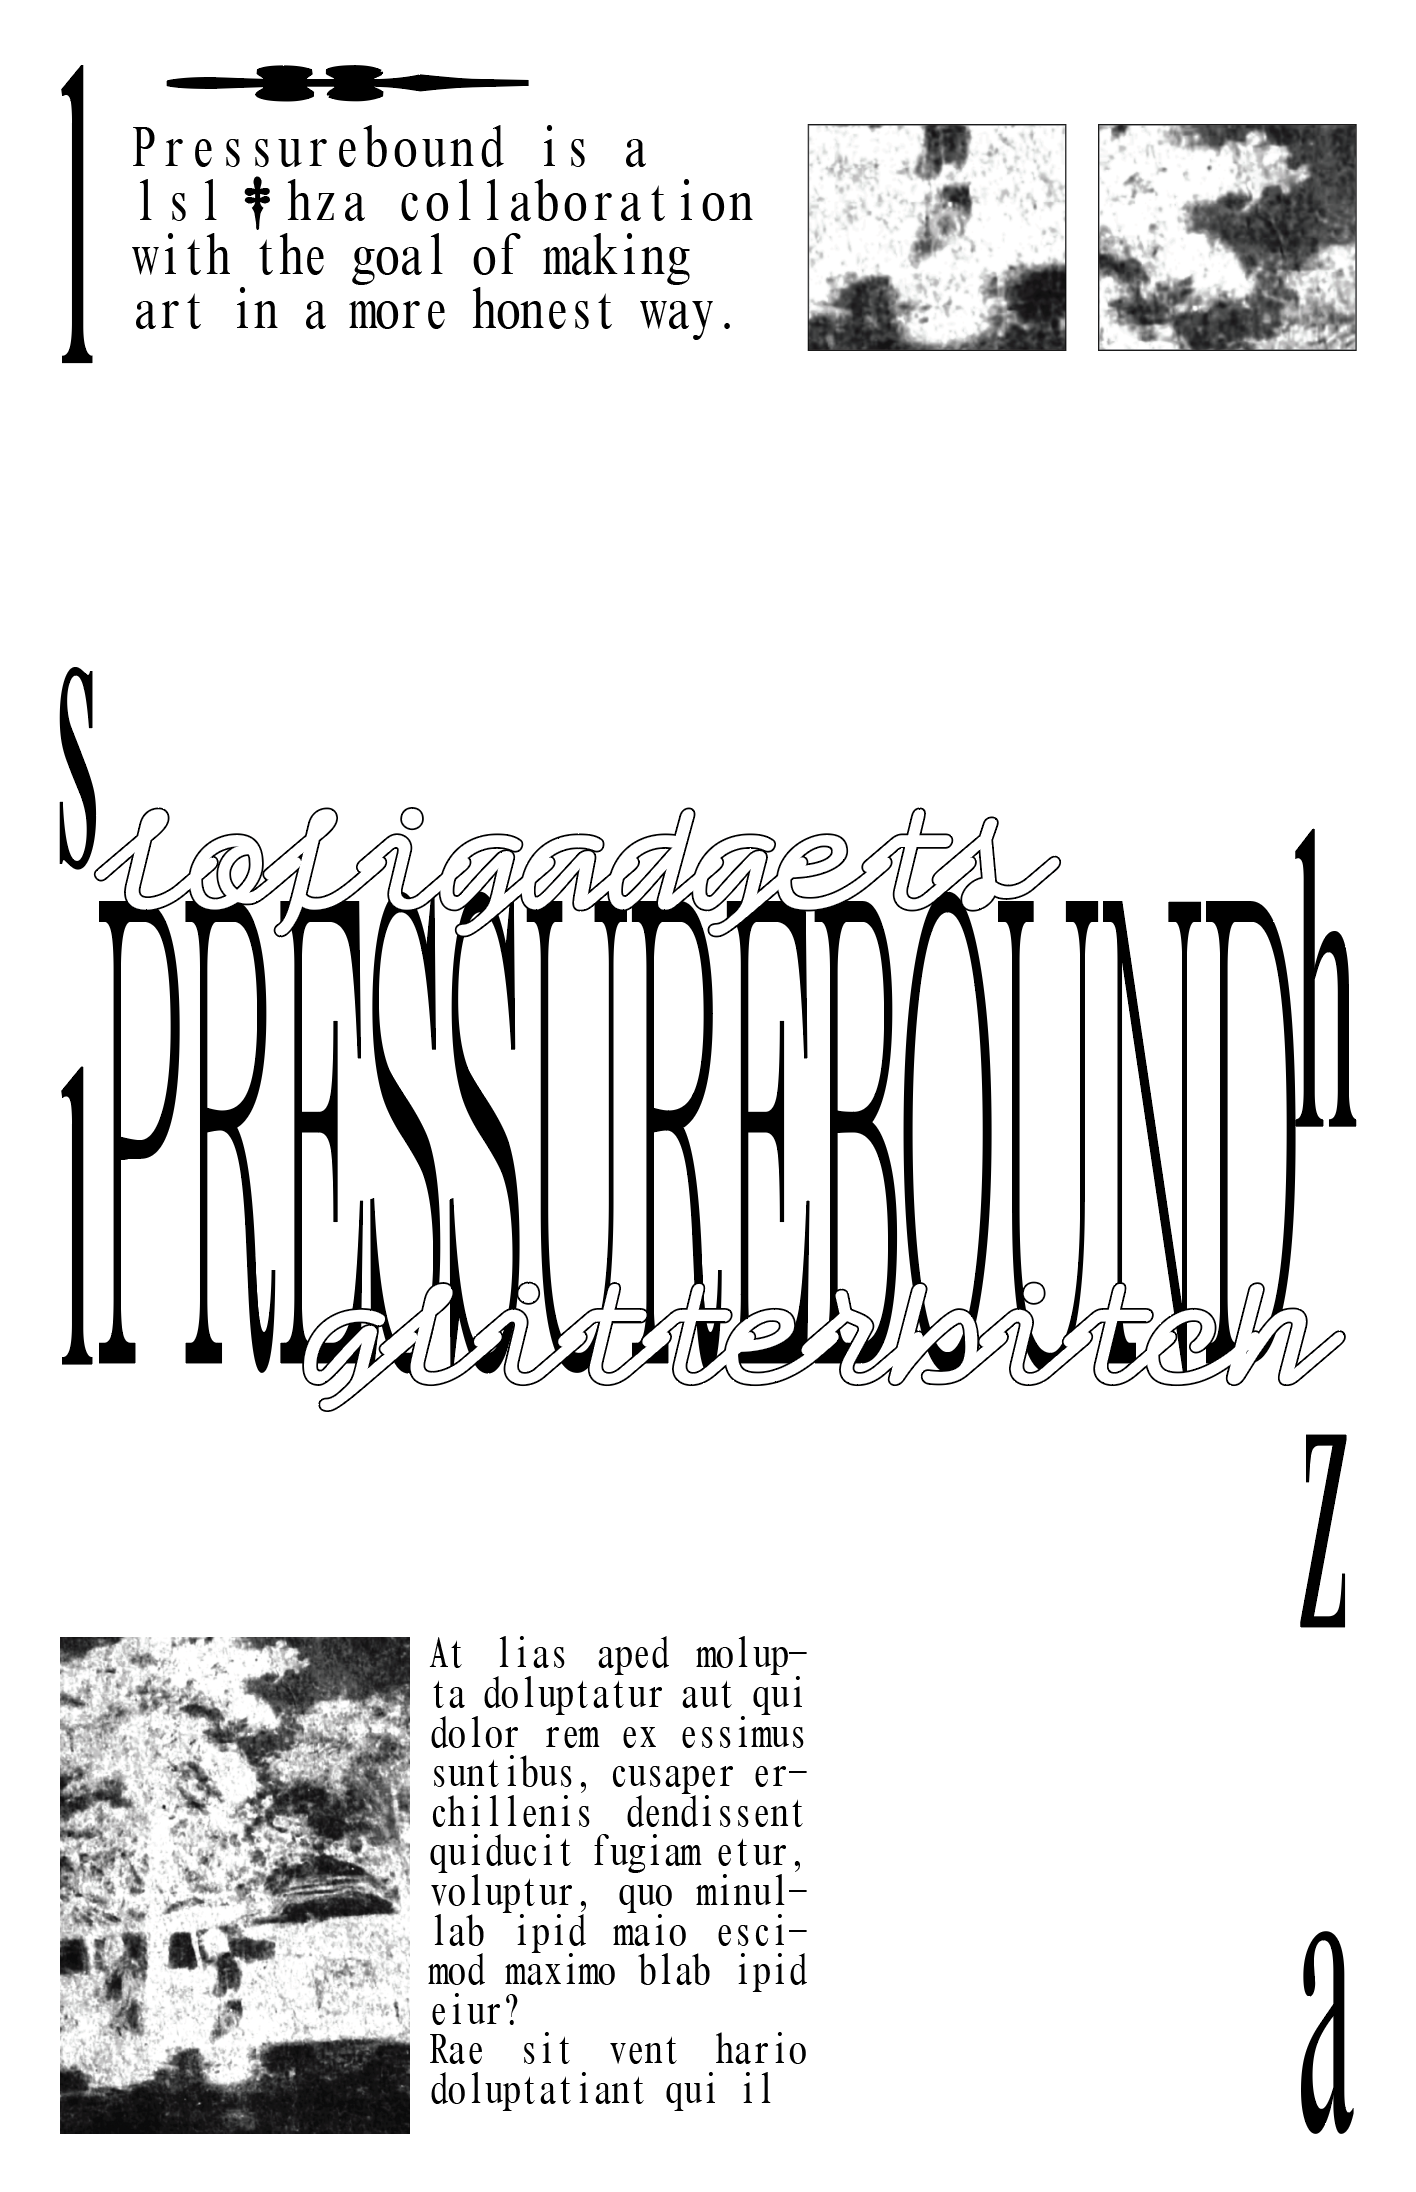 Screenshot of a draft of a poster, in black text/images on a white background. 'PRESSUREBOUND' stretched tall and narrow, positioned in the center of the composition. To its top left and bottom right are 'lsl' and 'hza' respectively, similarly stretched thin and long. At its top left and bottom right, 'PRESSUREBOUND' is intertwined with the words 'lofigadgets' and 'glitterbitch', both in a bubbly font. To the top and bottom of the composition are crops of an unidentifiable image and filler text, of which the top left paragraph reads 'Pressurebound is a lsl & hza collaboration with the goal of making art in a more honest way'. (The & is replaced with a dagger symbol.)